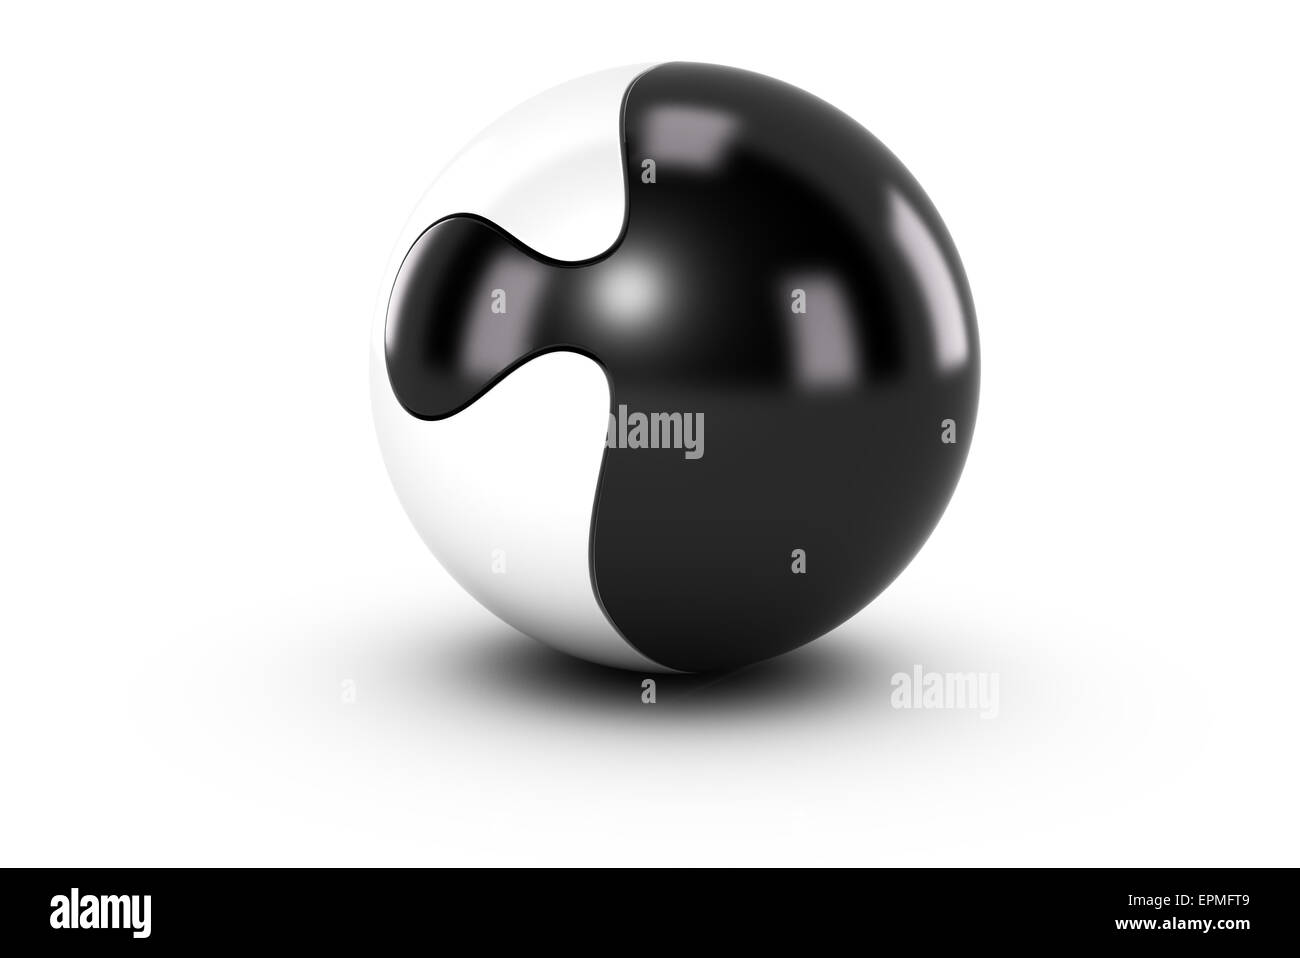 Splited sphere or spherical jigsaw puzzle with two colors black and white symbol of partnership or collaborative work or strateg Stock Photo